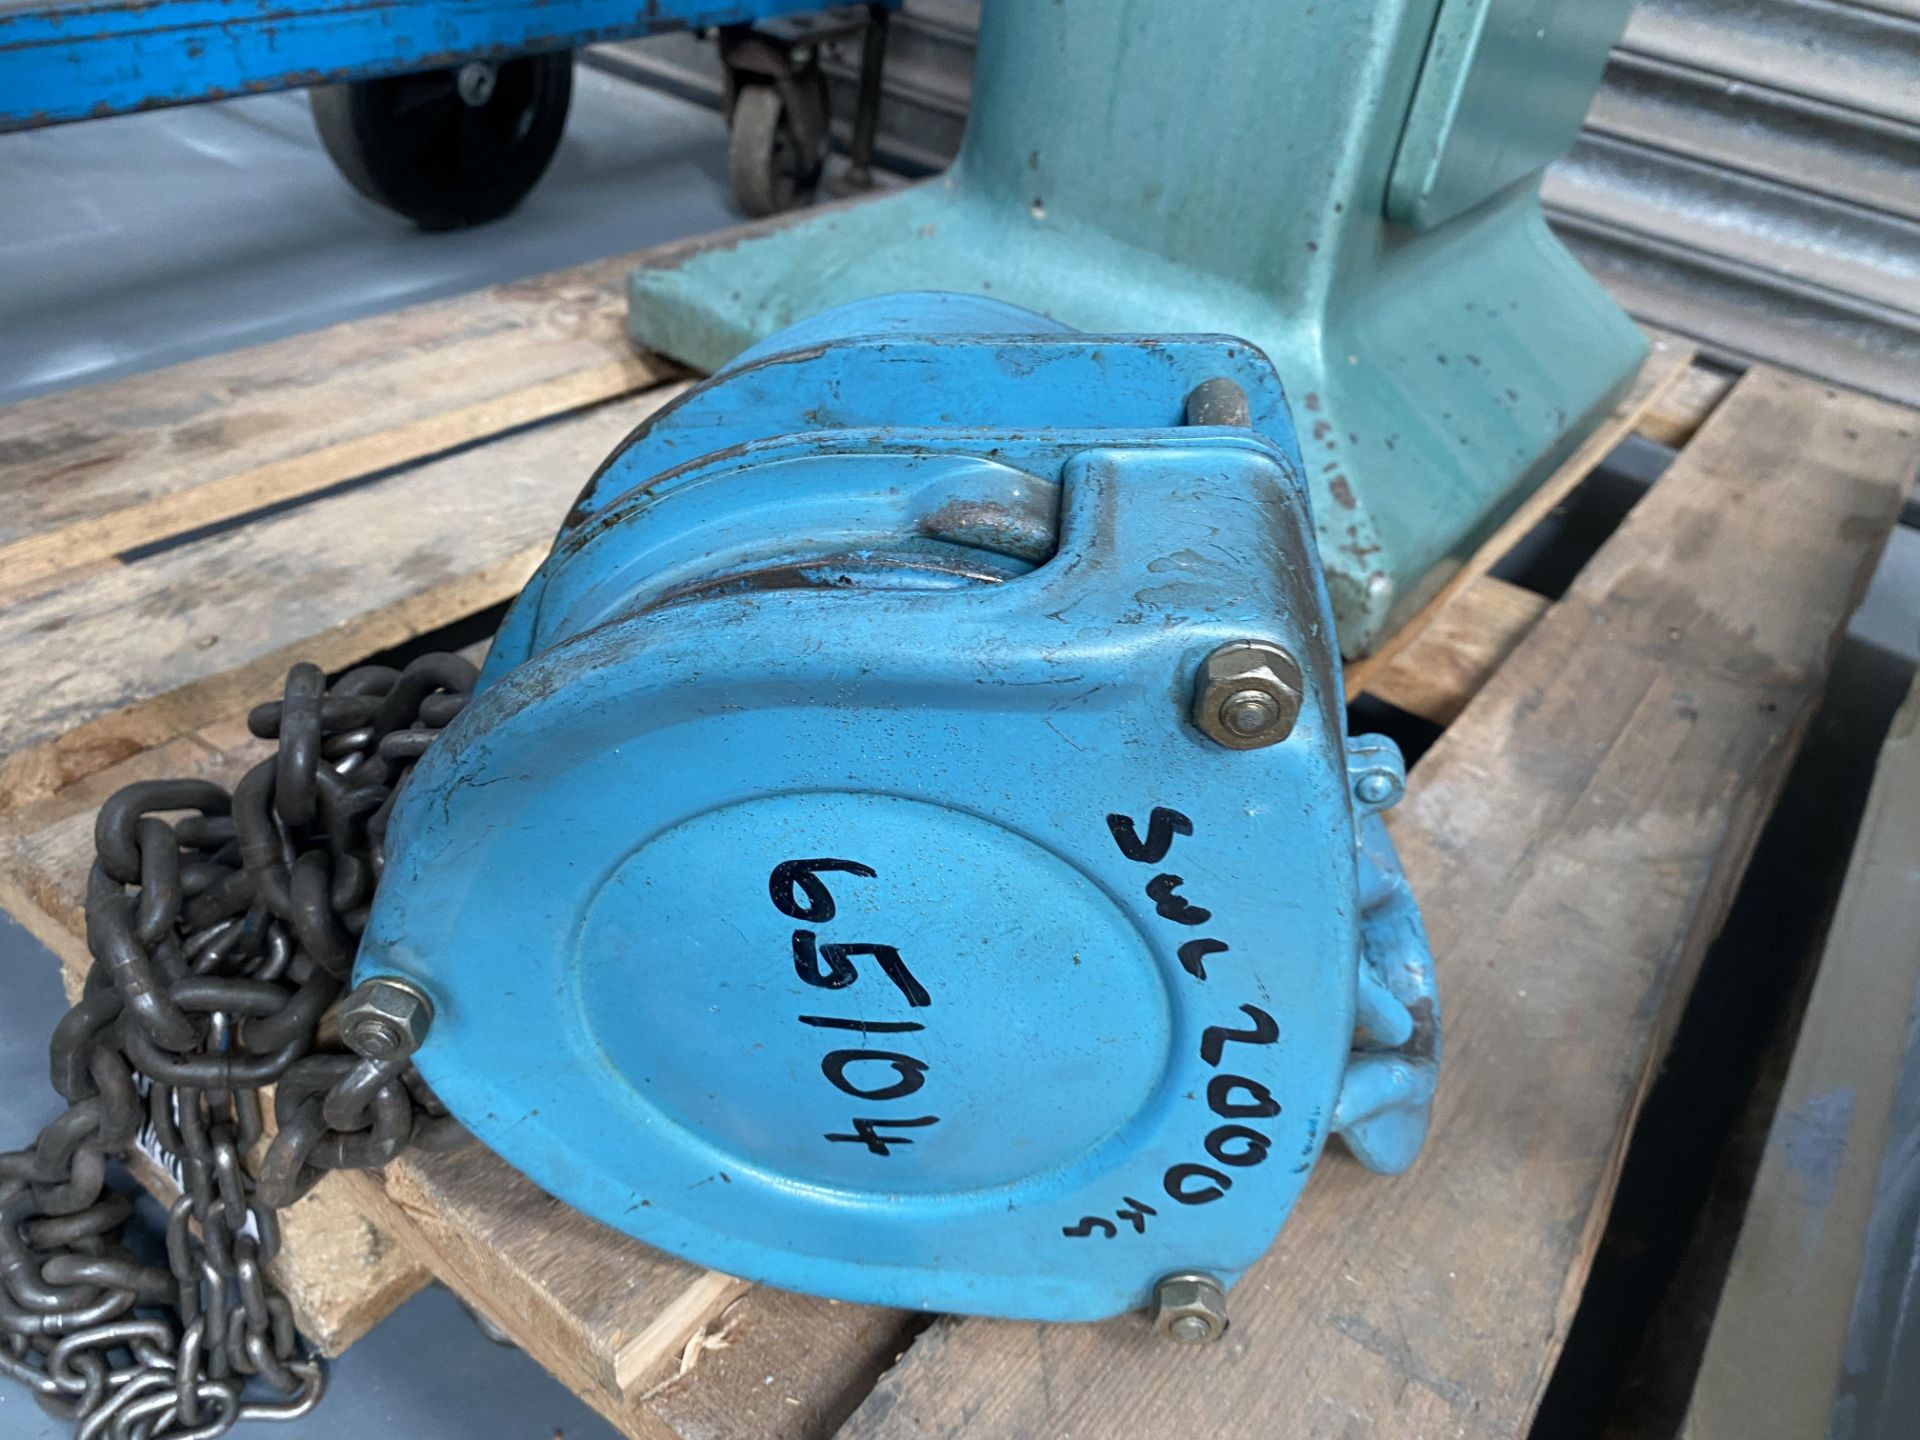 Watts Lifting Equipment, A Frame Lifting Gantry, SWL 2 Tons with chain hoist - Image 10 of 12